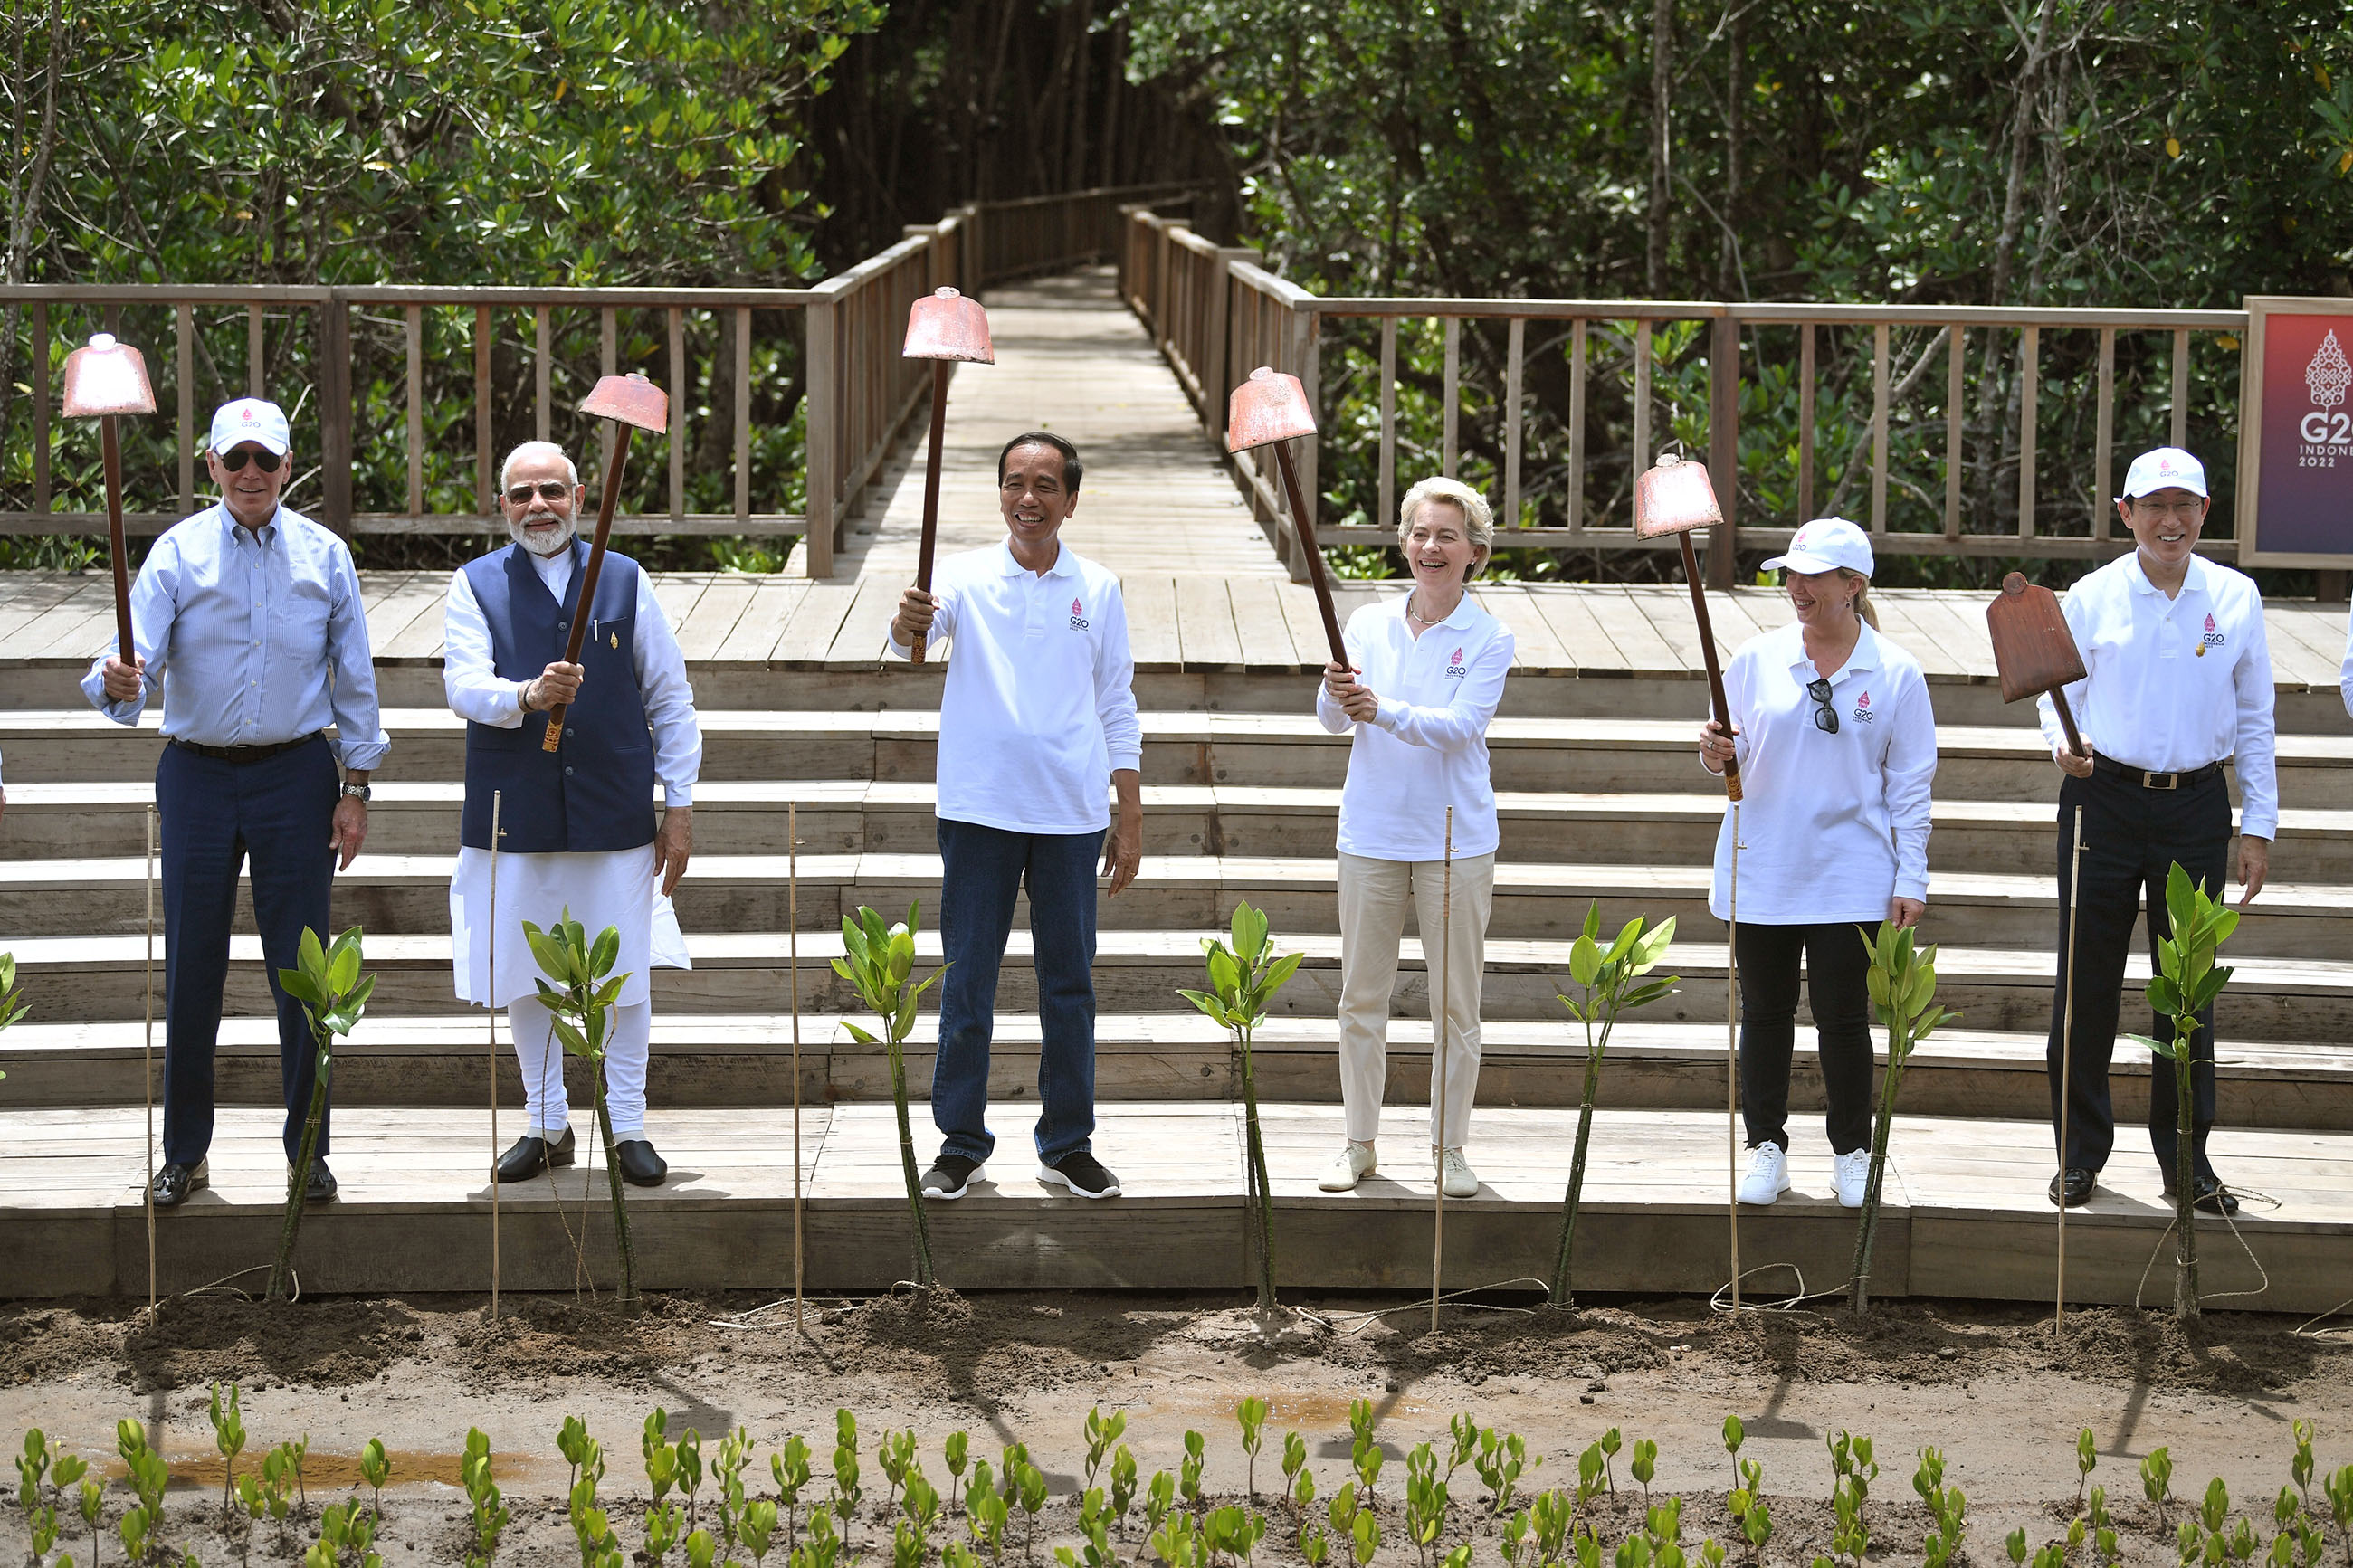 Prime Minister Kishida visiting a mangrove forest (1) (Photo credit: Host Photo Agency G20)